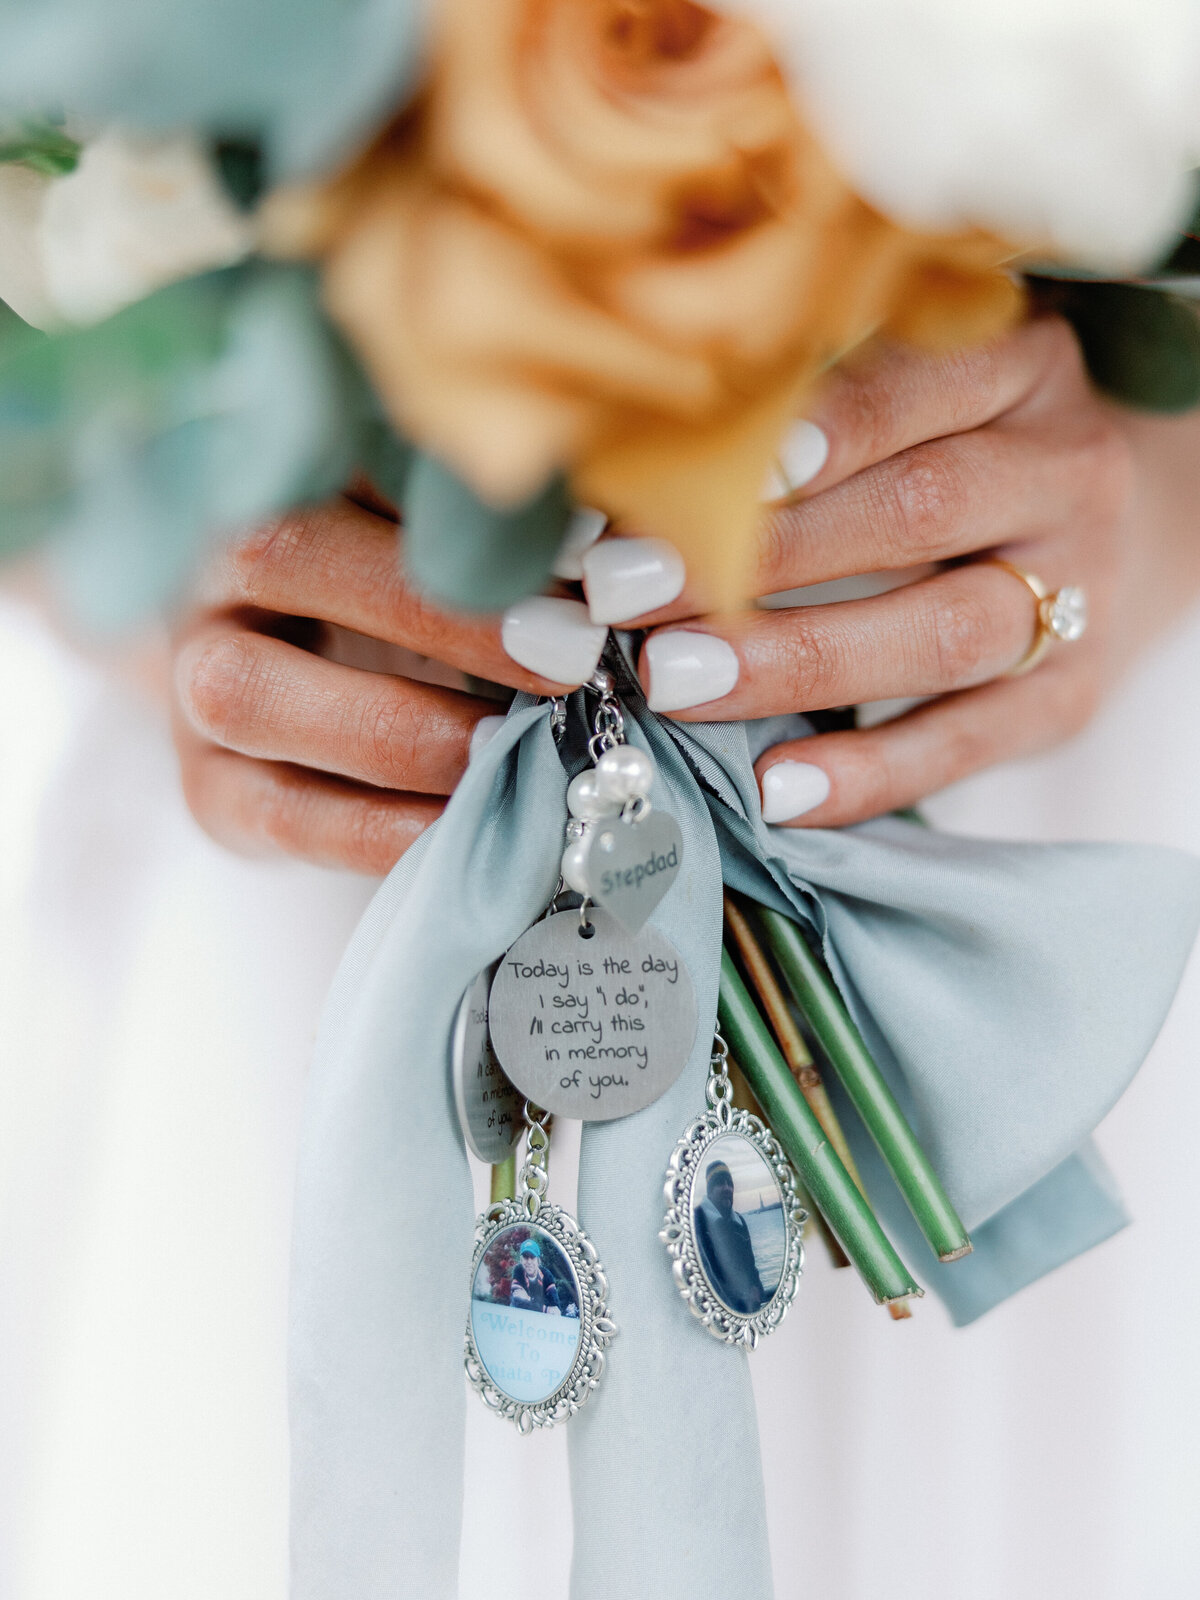 A close up of the brides bouquet which has a dedication charm for her passed grandmother